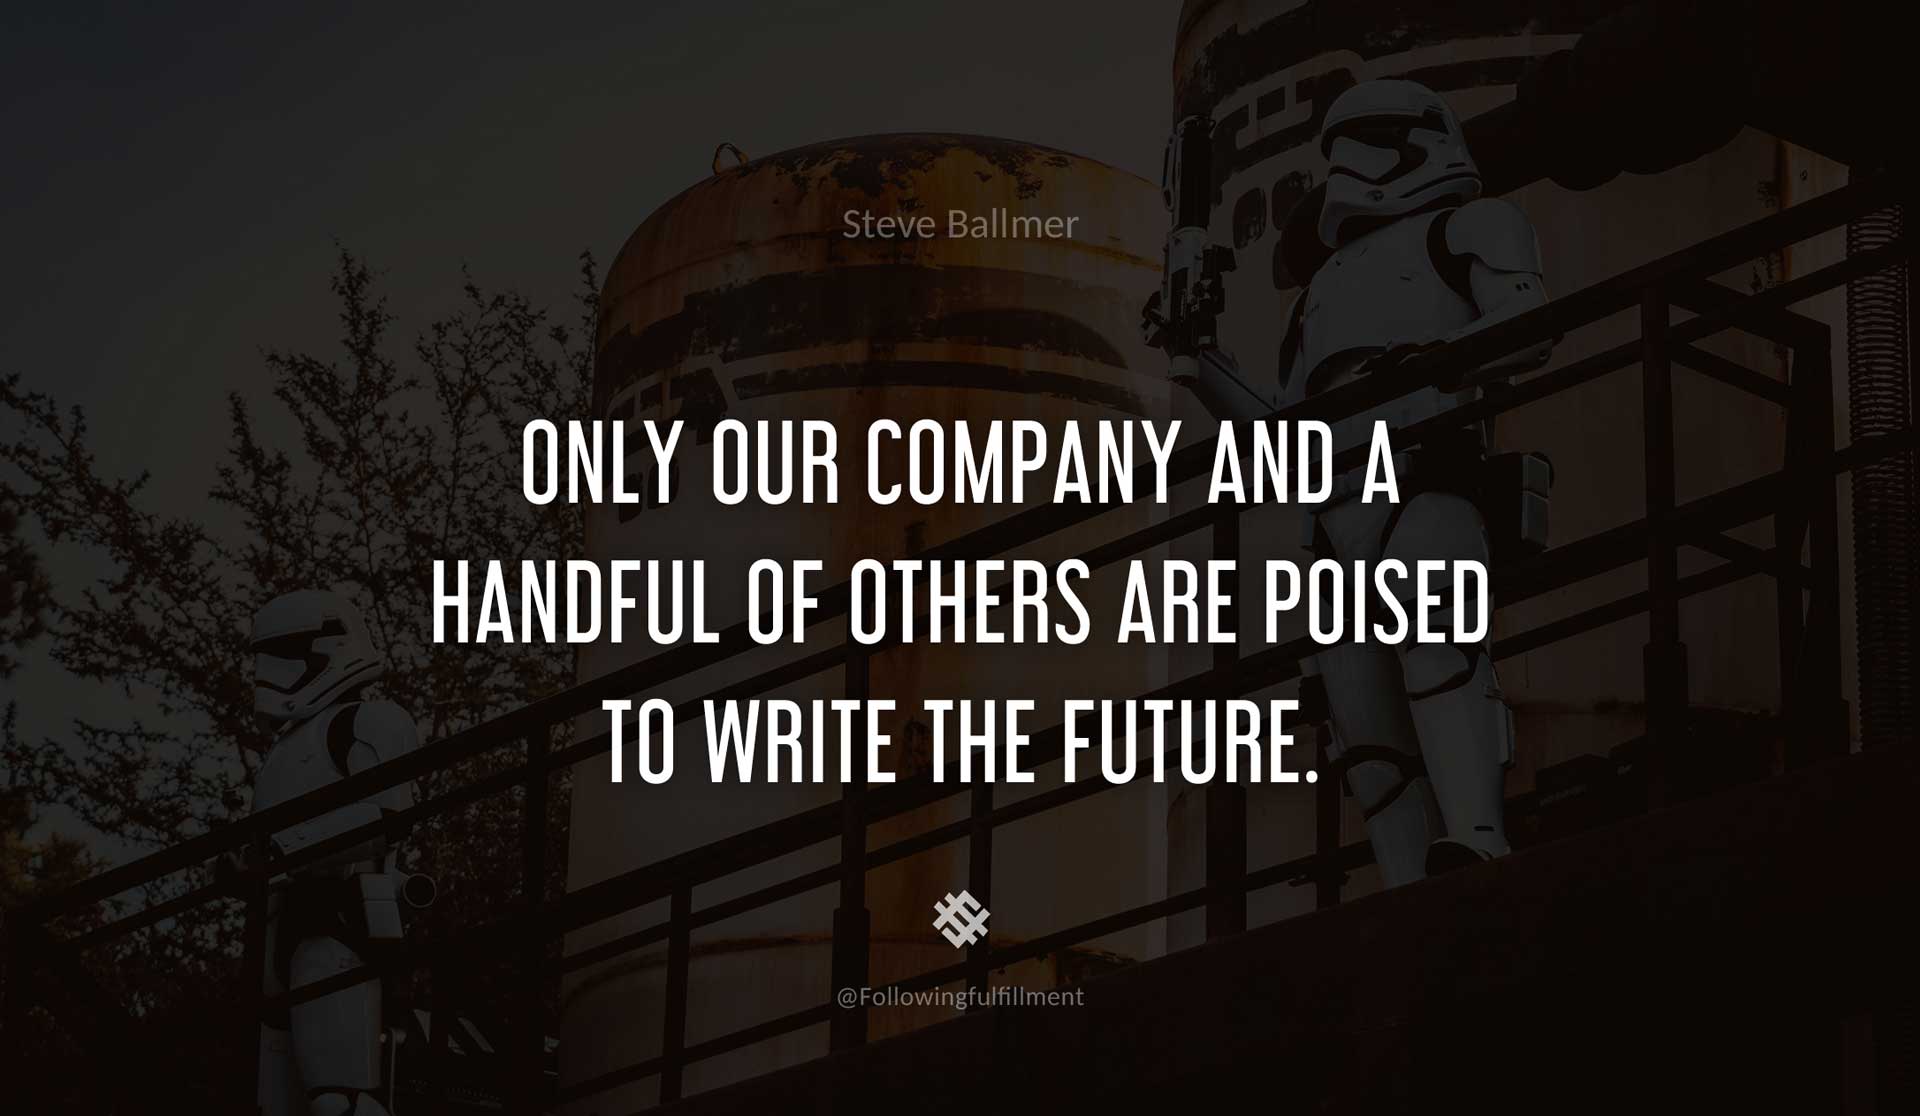 Only-our-company-and-a-handful-of-others-are-poised-to-write-the-future.-STEVE-BALLMER-Quote.jpg